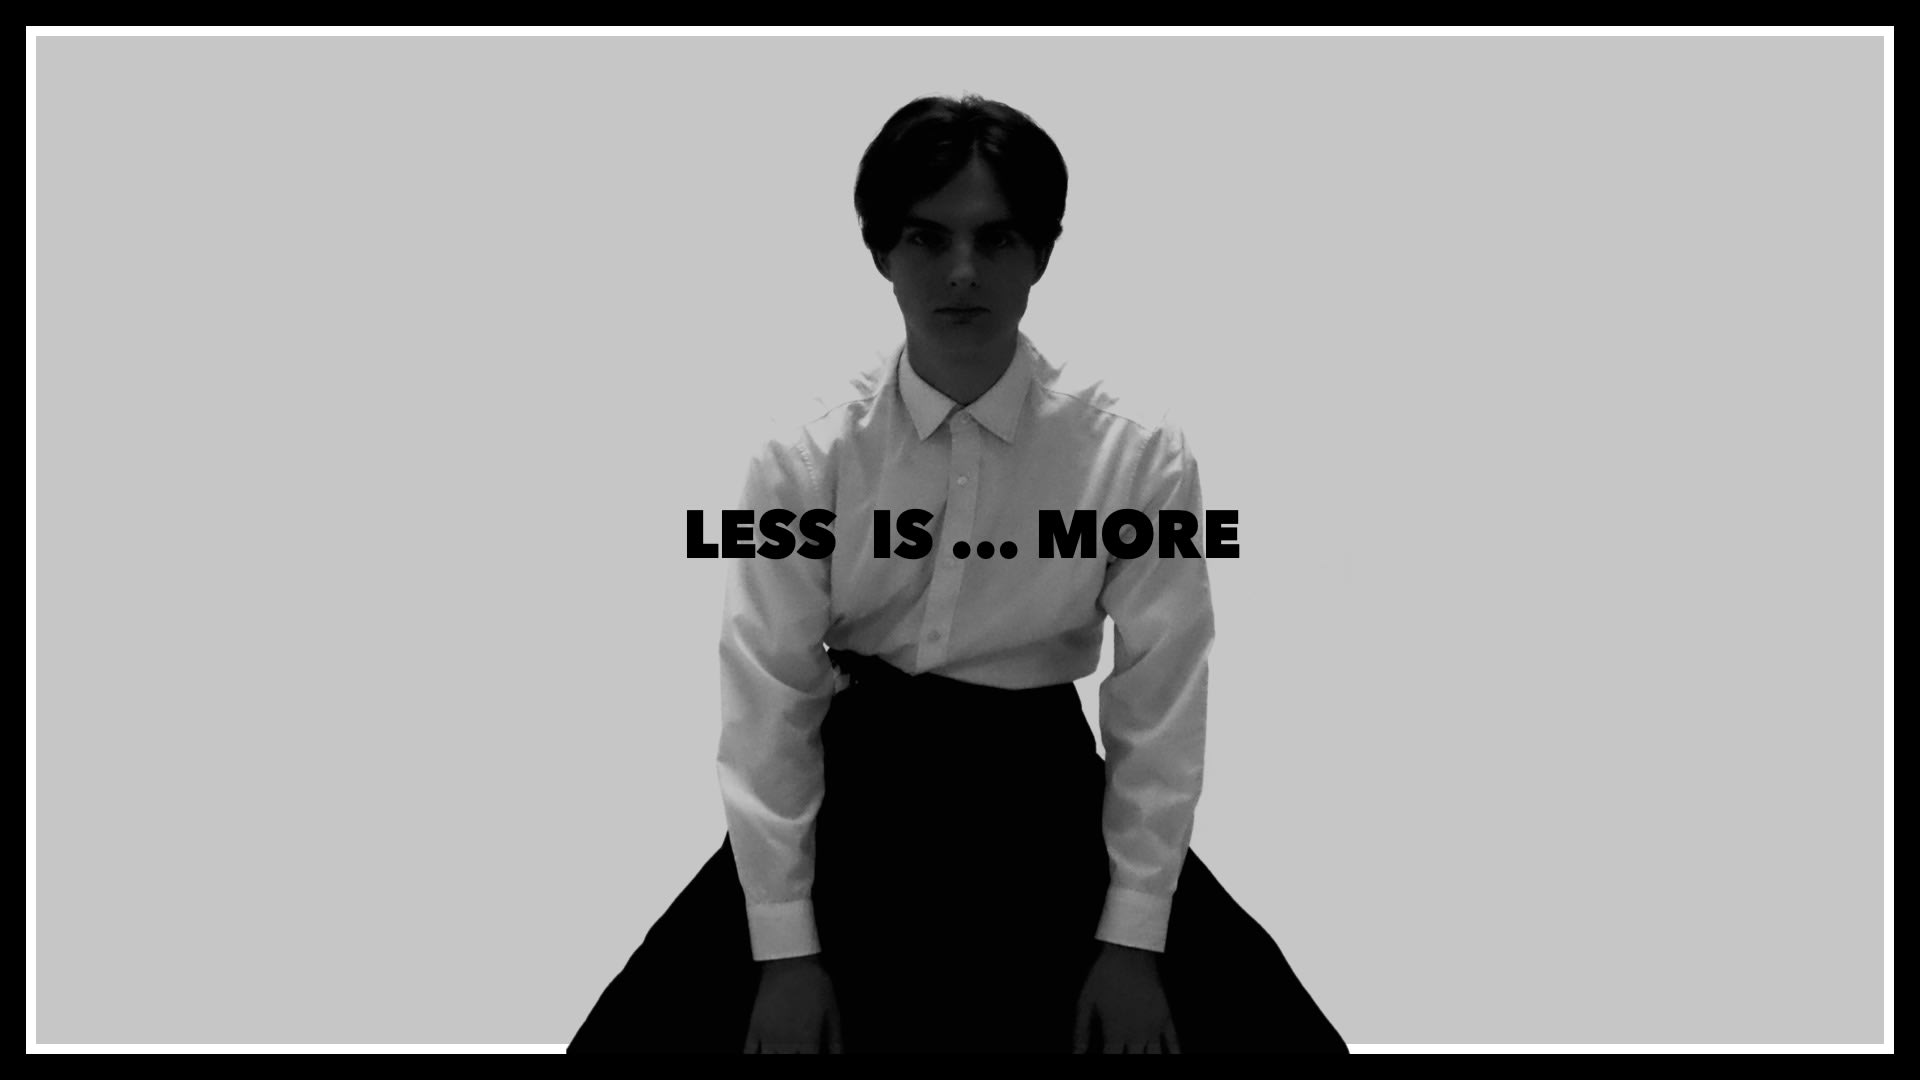 LESS IS ... MORE